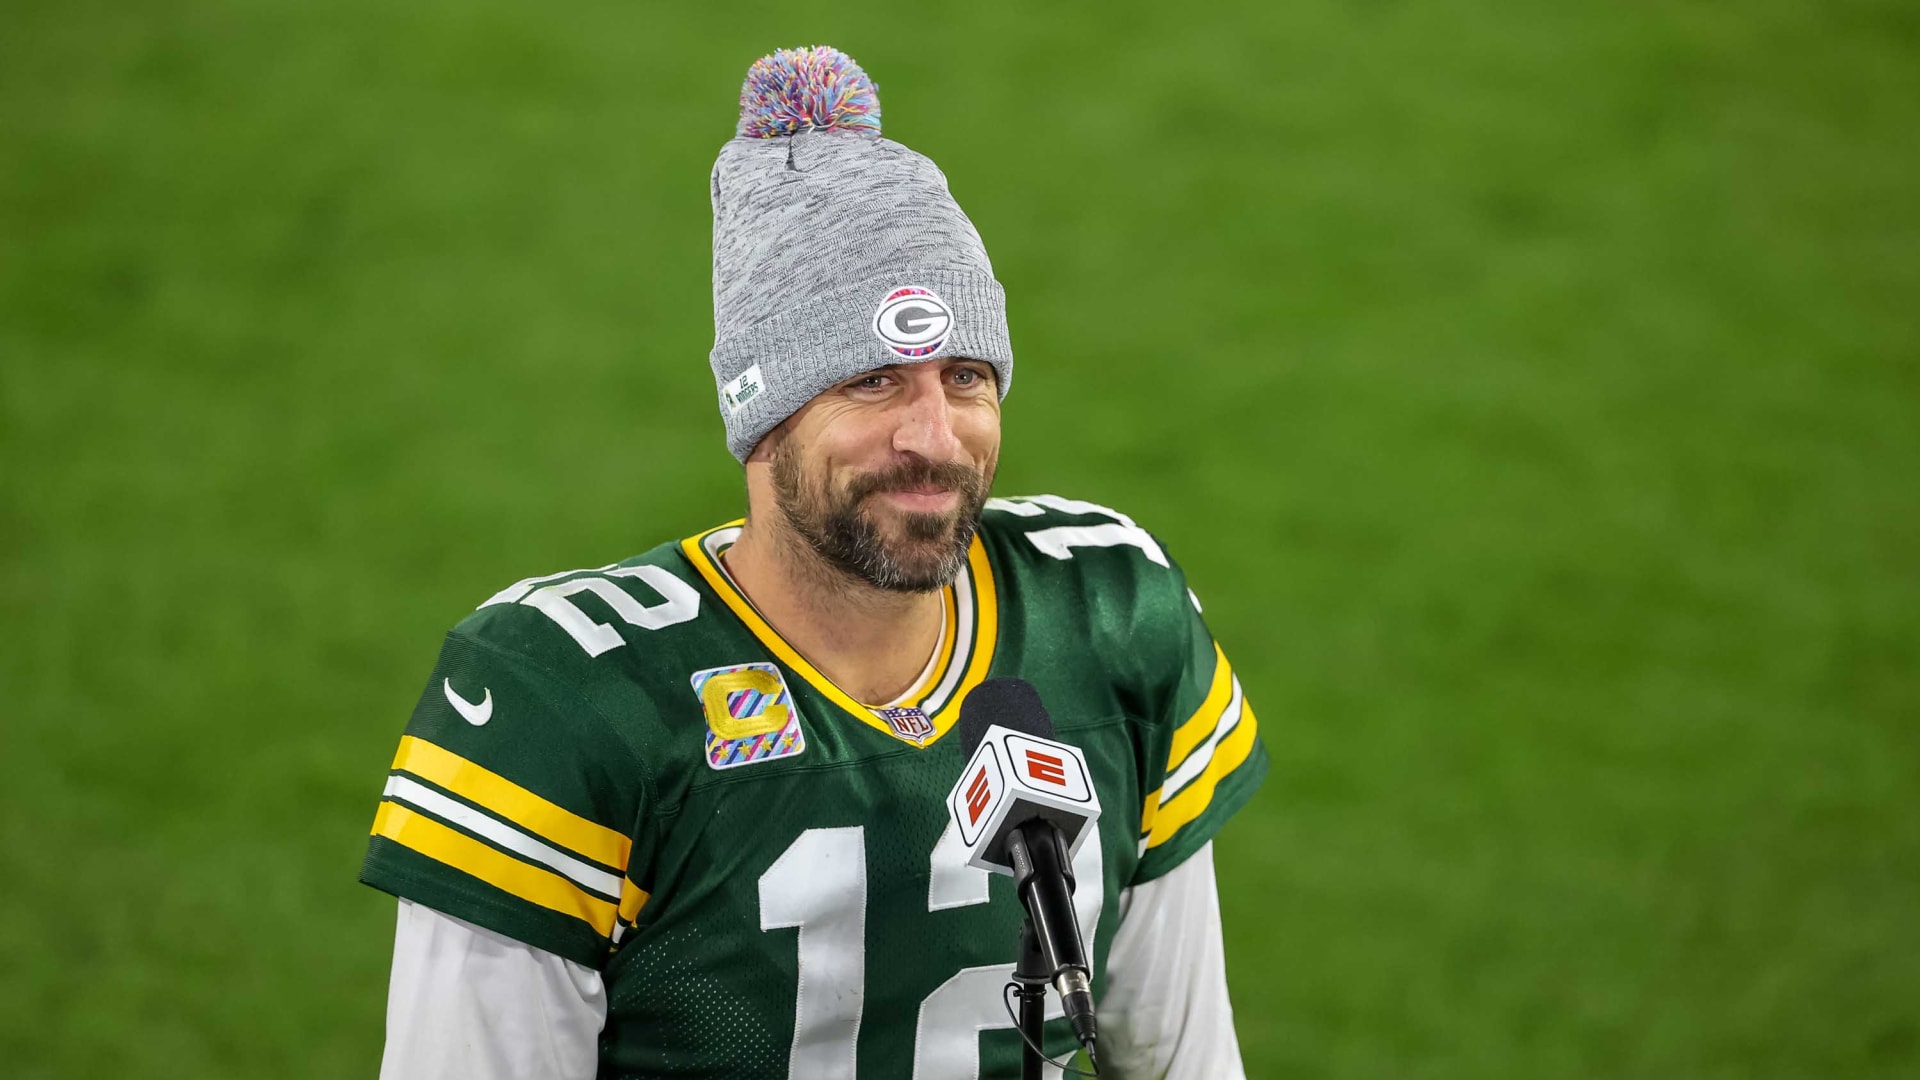 Aaron Rodgers, No. 12 of the Green Bay Packers.